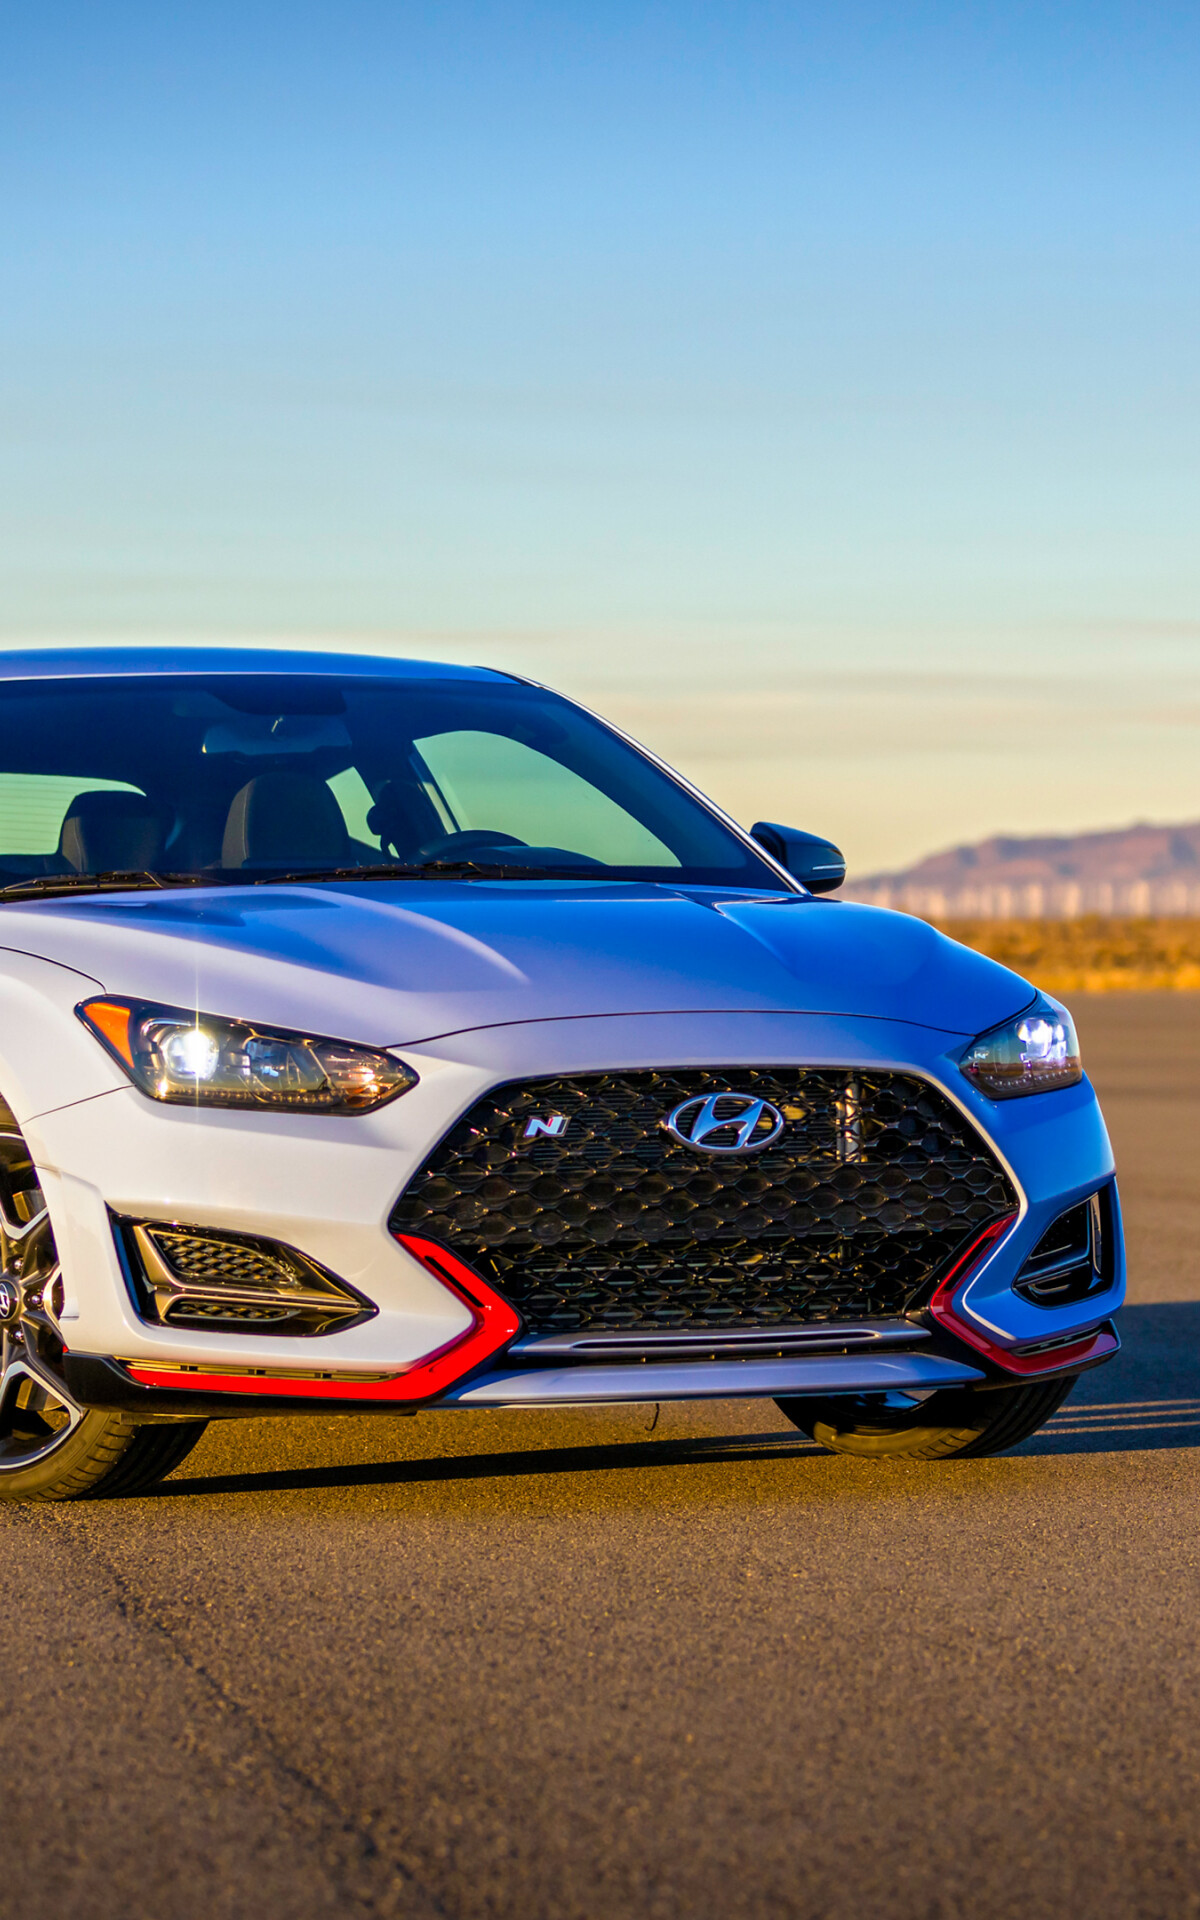 Hyundai: 2018 Veloster N model, The company's V8 Tau engine received 2009 Ward's 10 Best Engines award. 1200x1920 HD Wallpaper.